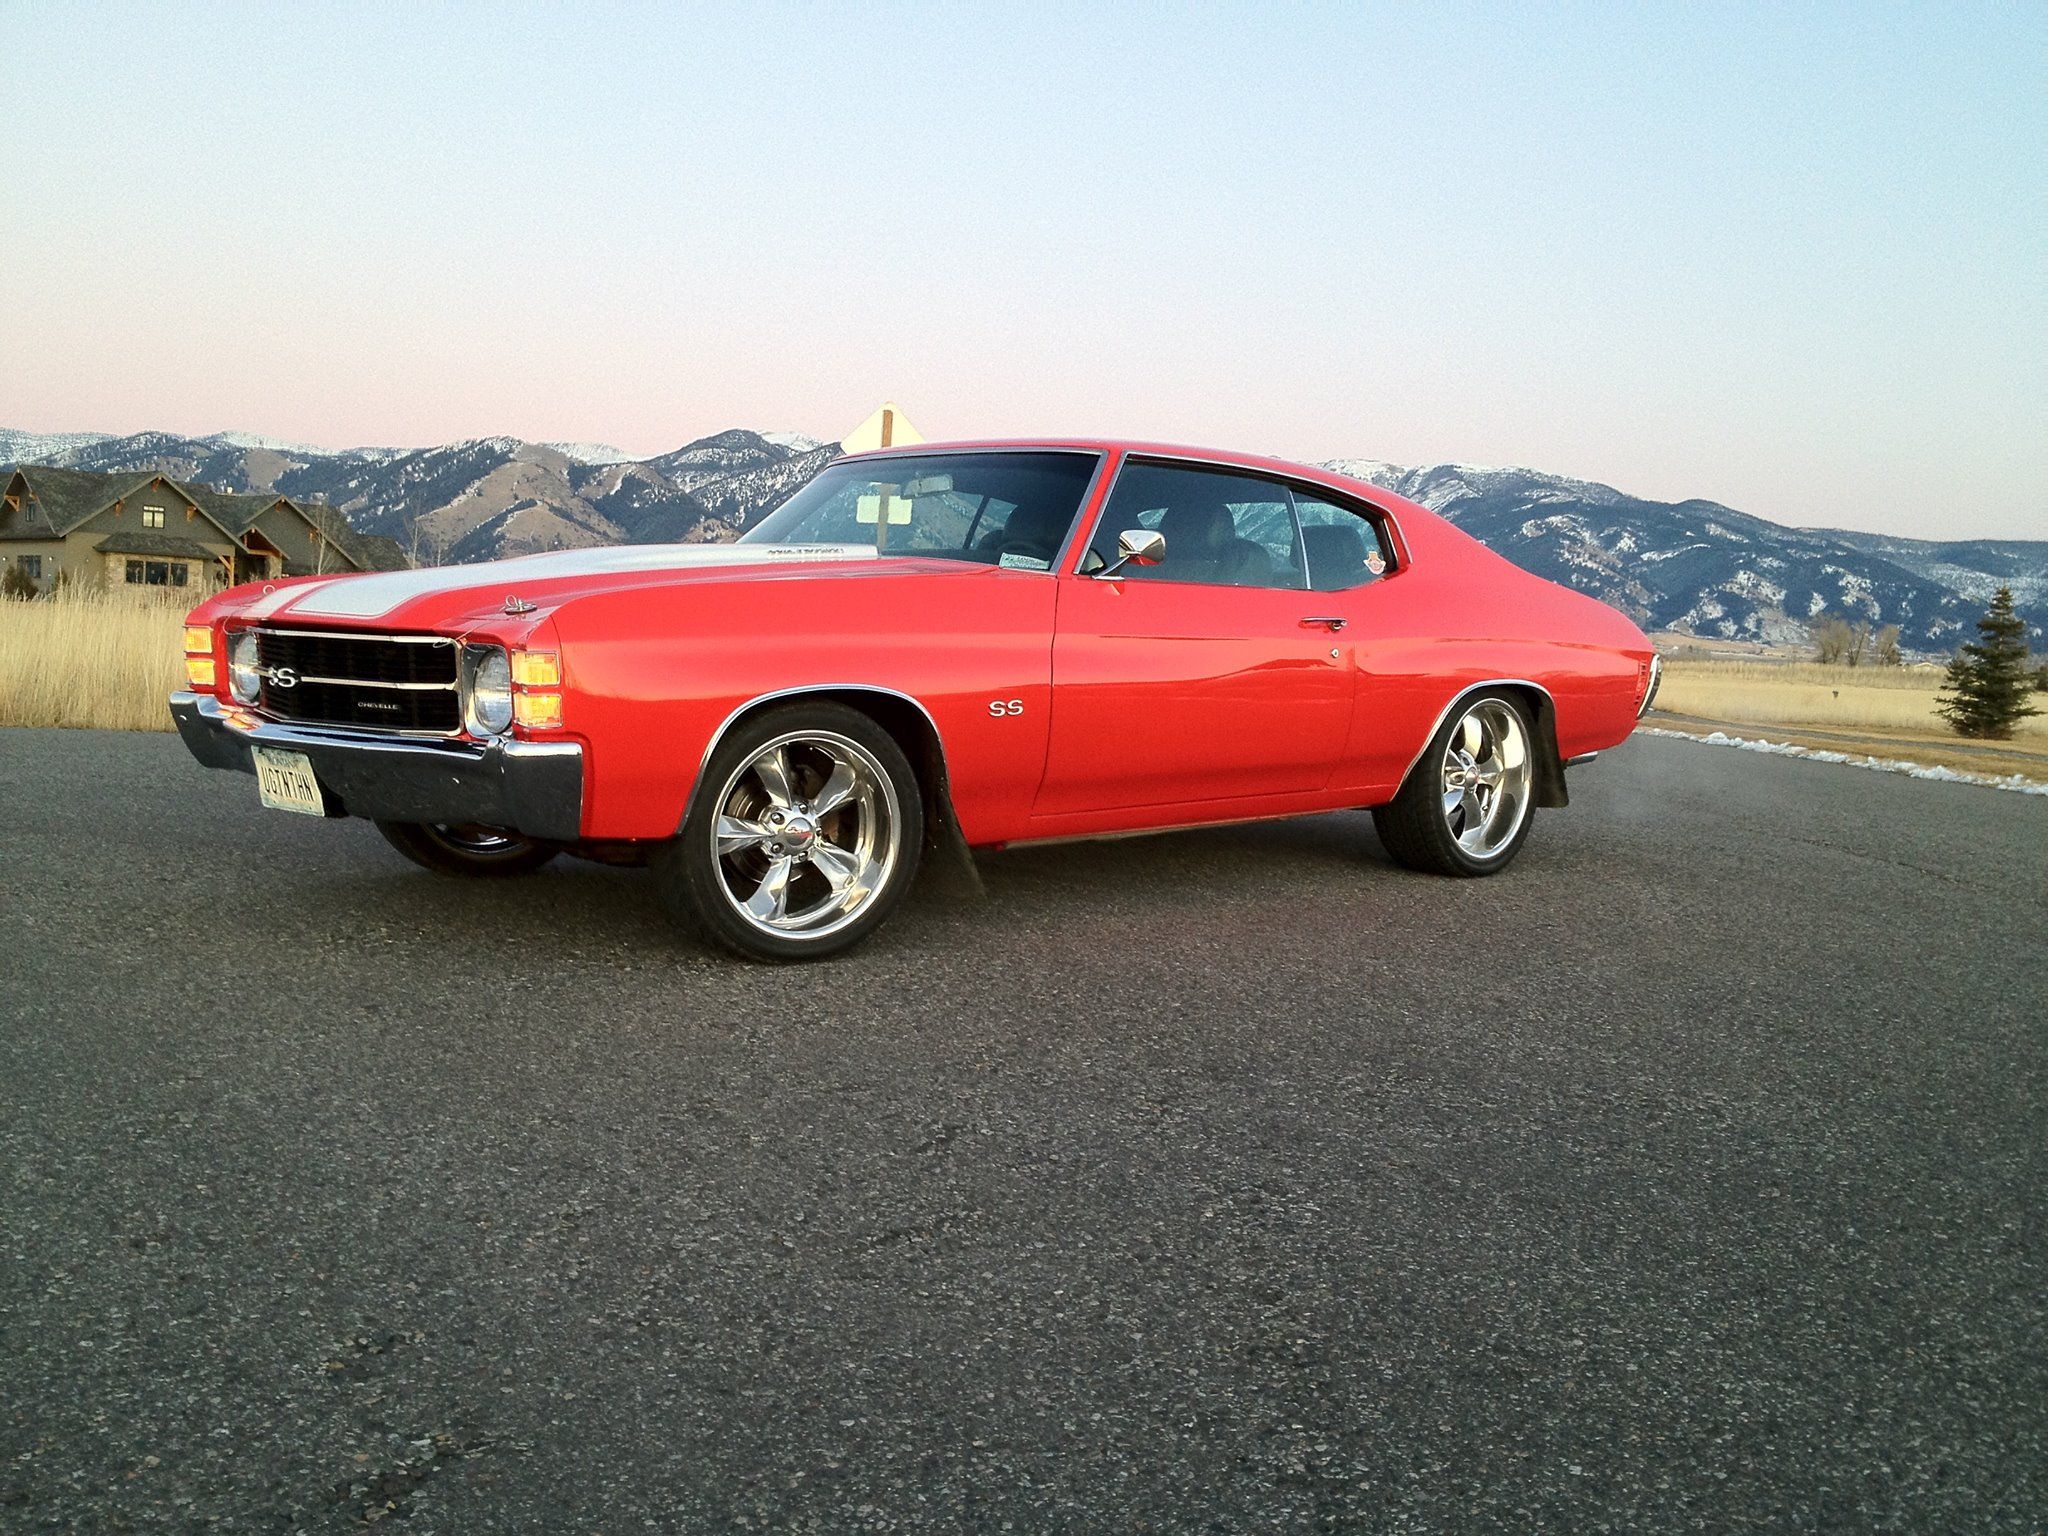 1971 Chevy Chevelle SS -   Chevy Chevelle SS